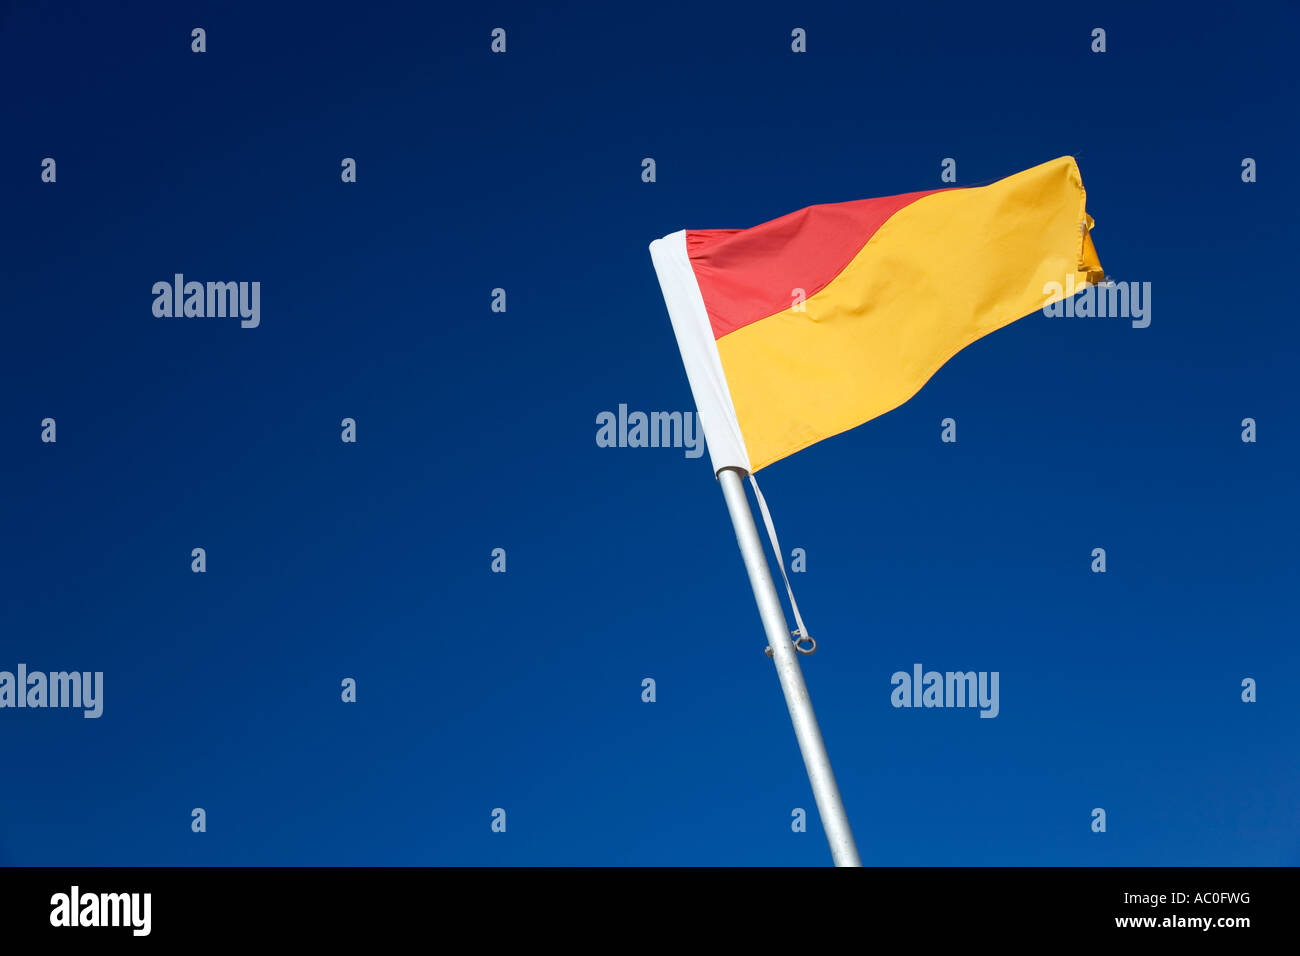 The iconic red and yellow flag of Australian lifesaving Pairs of flags Stock Photo